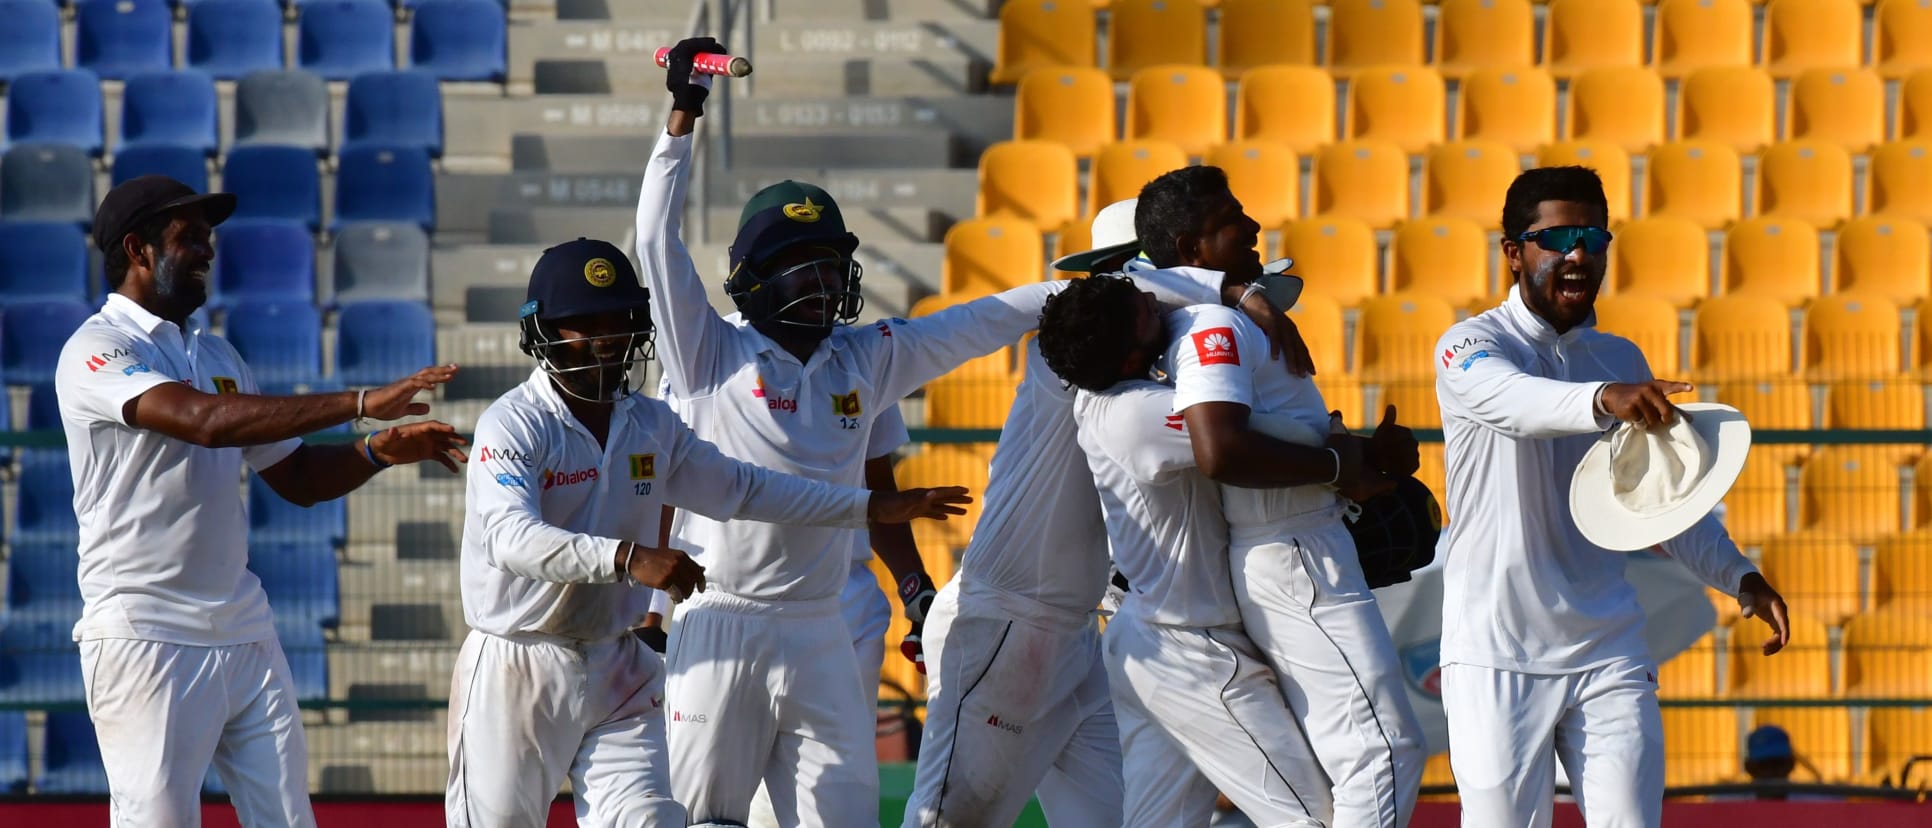 Herath passed the 400-wicket milestone in the Abu Dhabi Test against Pakistan in 2017, the only left-arm spinner to breach the milestone to date